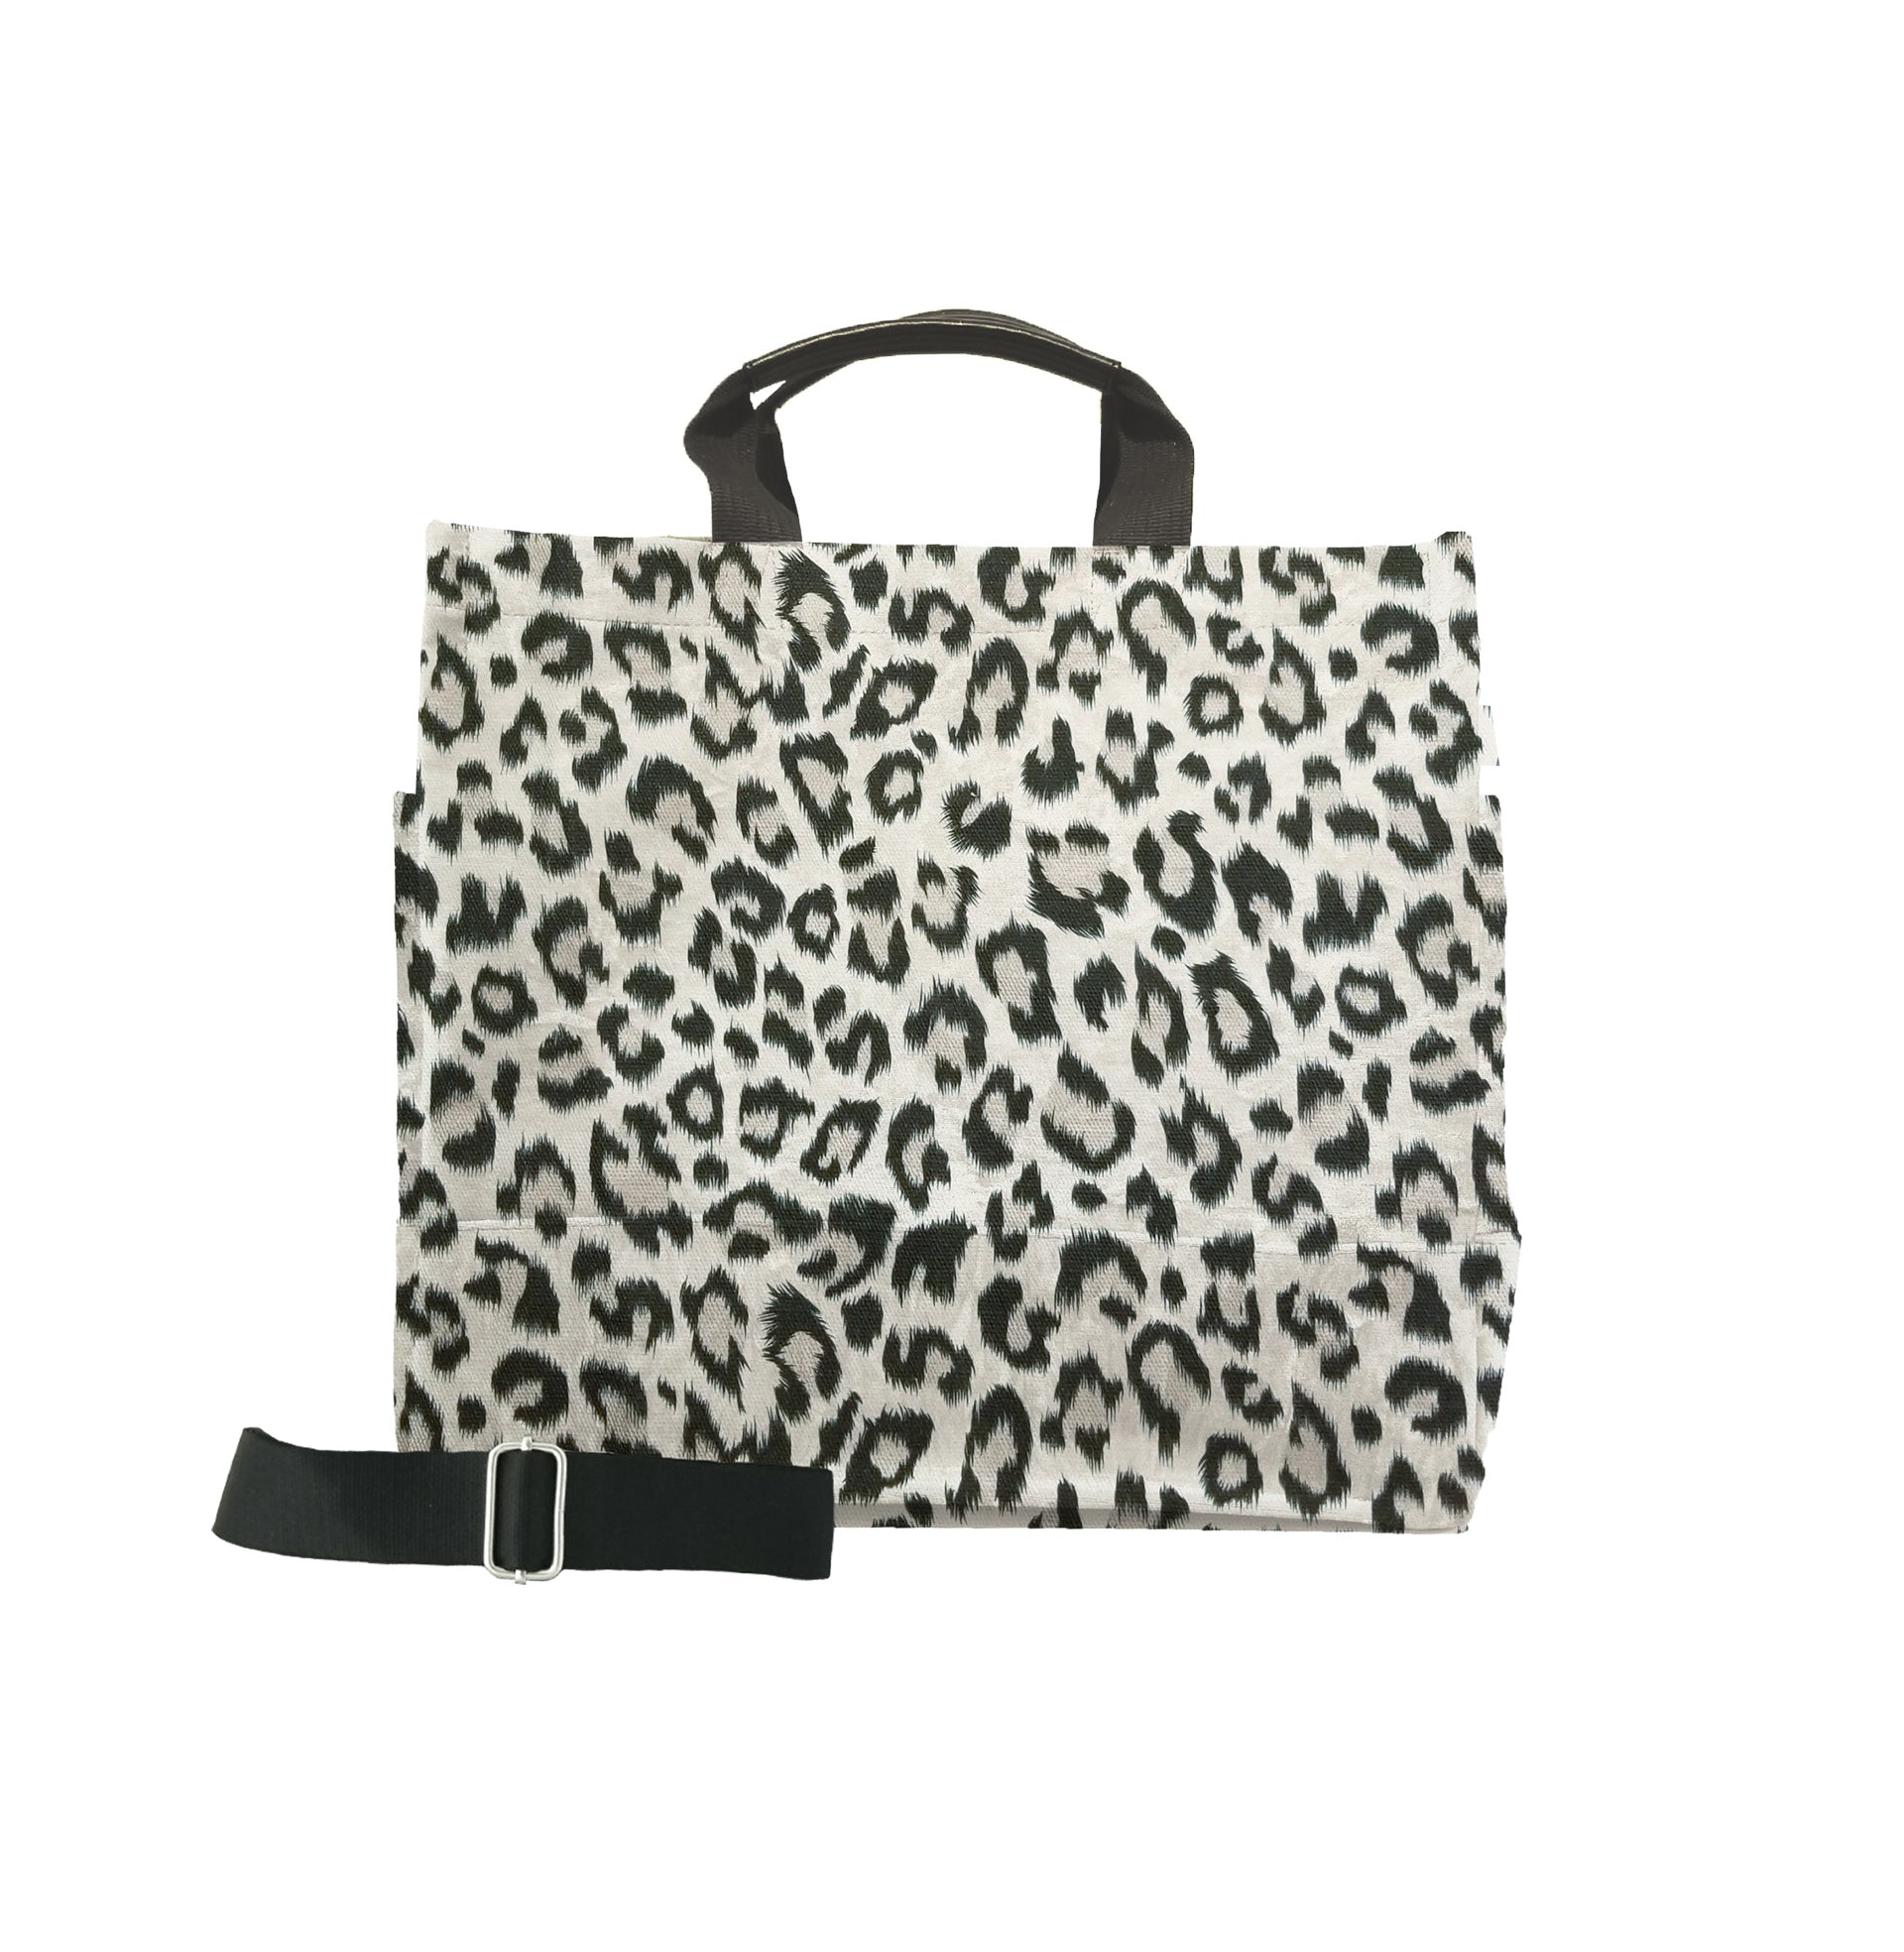 Luxe North South Bag: Leopard – Quilted Koala